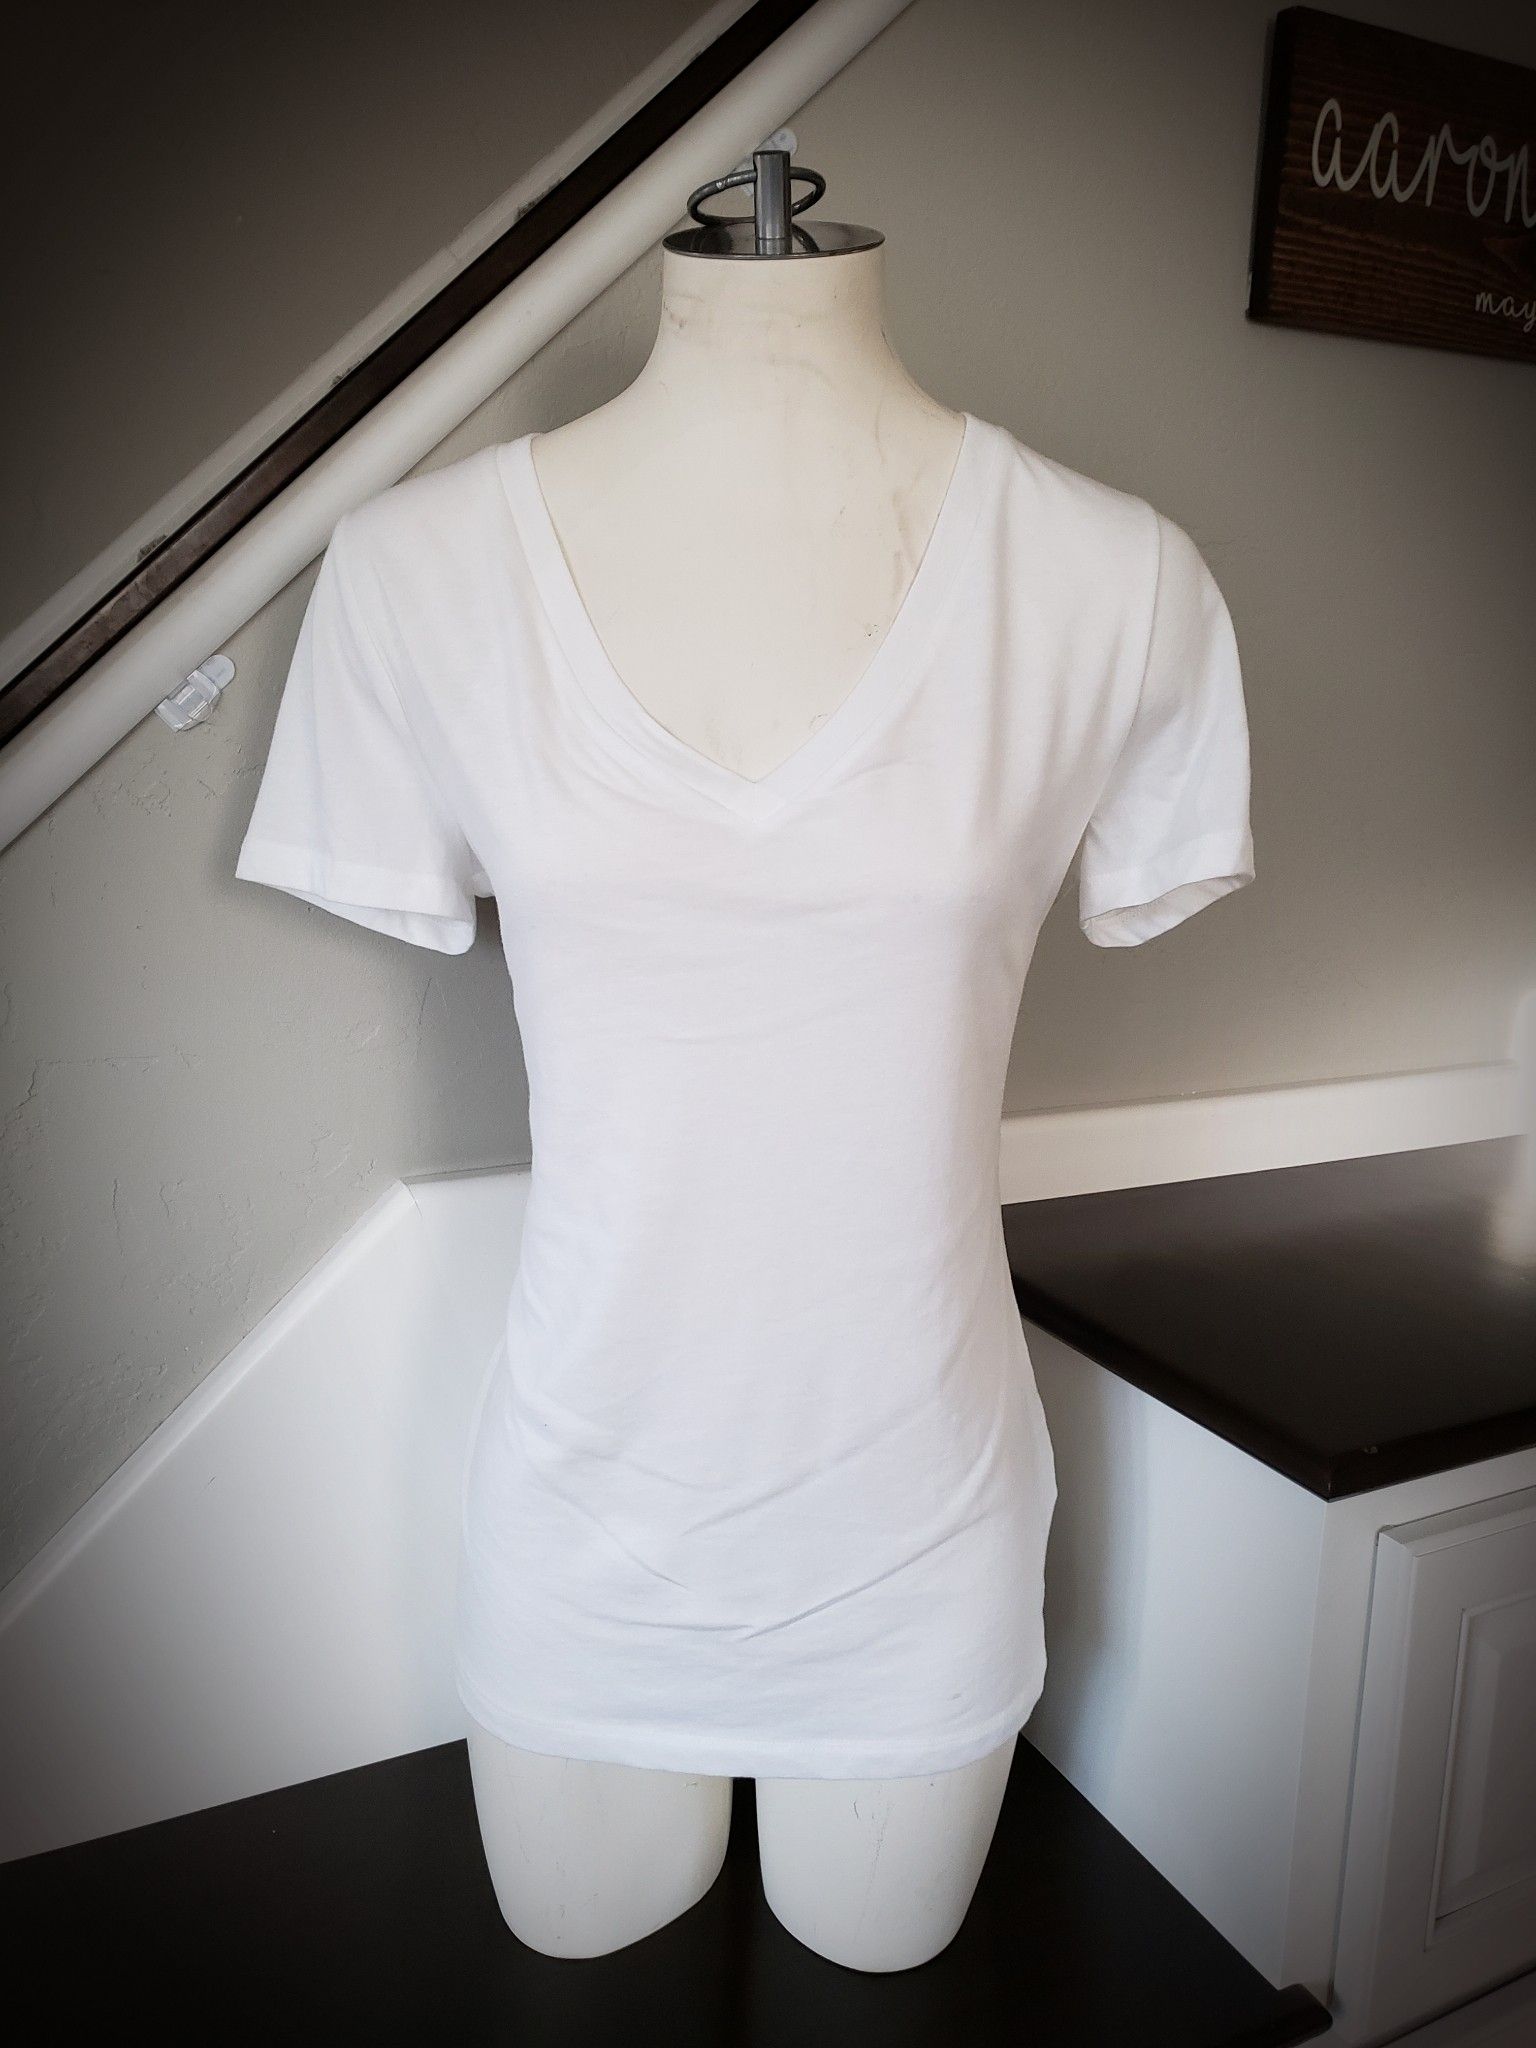 Female Mannequin Torso - Flaws but Still Works Great!